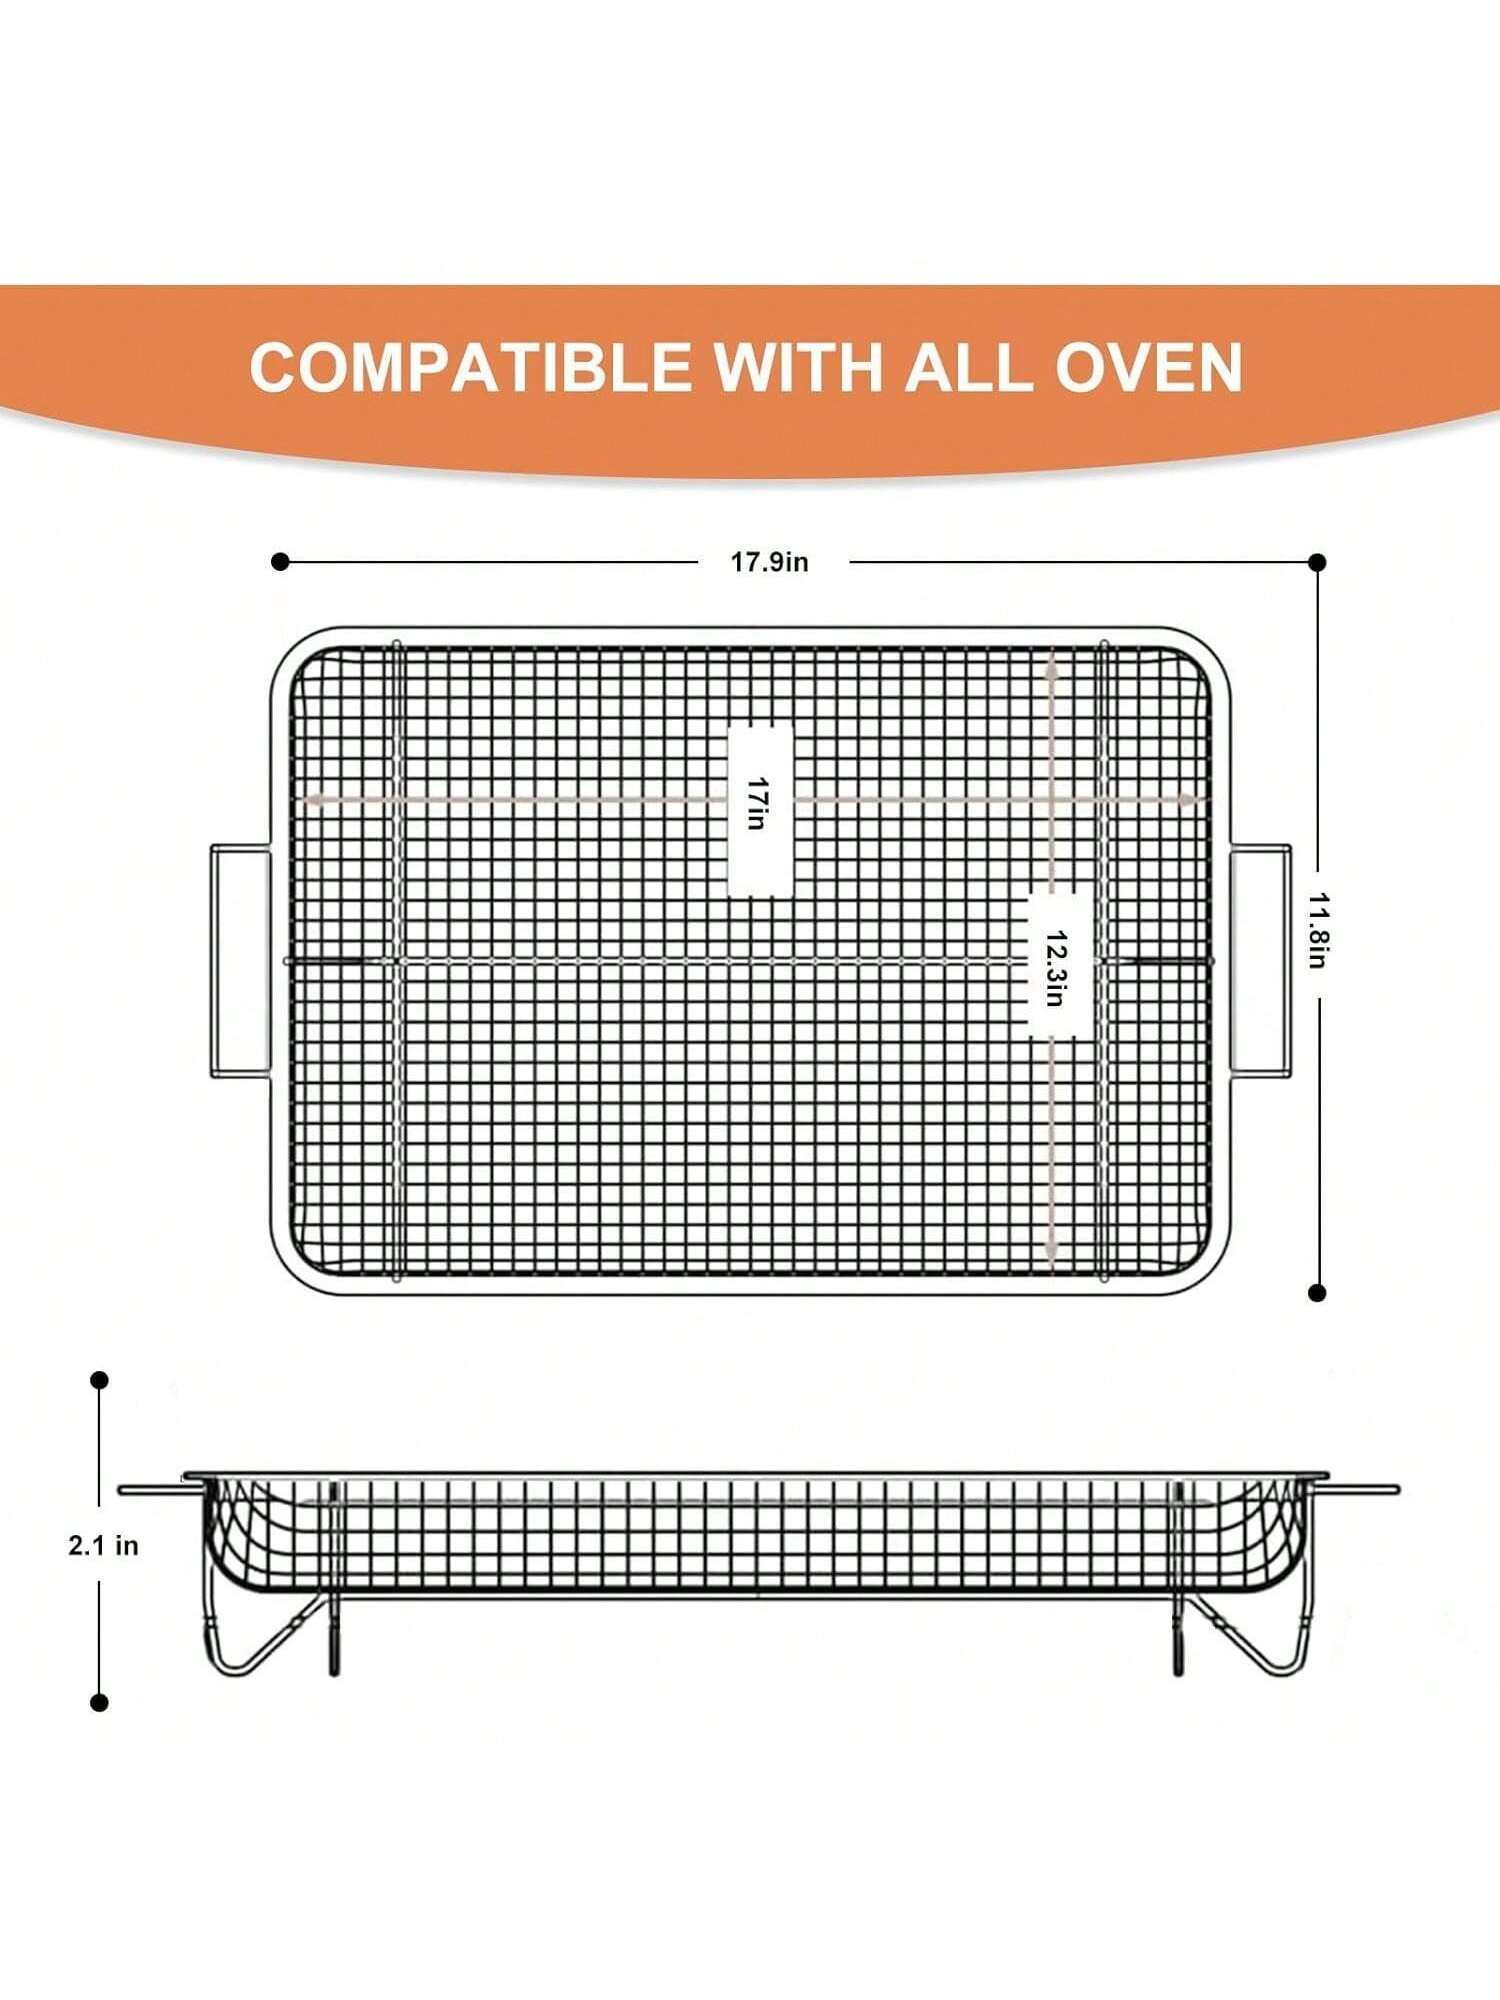 Extra Large Air Fryer Basket and Tray for Oven, 18.8'' x 13.3'' Stainless  Steel Crisper Tray and Basket Set, Non-stick Mesh Basket Set, Air Fryer Tray  Roasting Basket for Fries/Bacon/Chicken